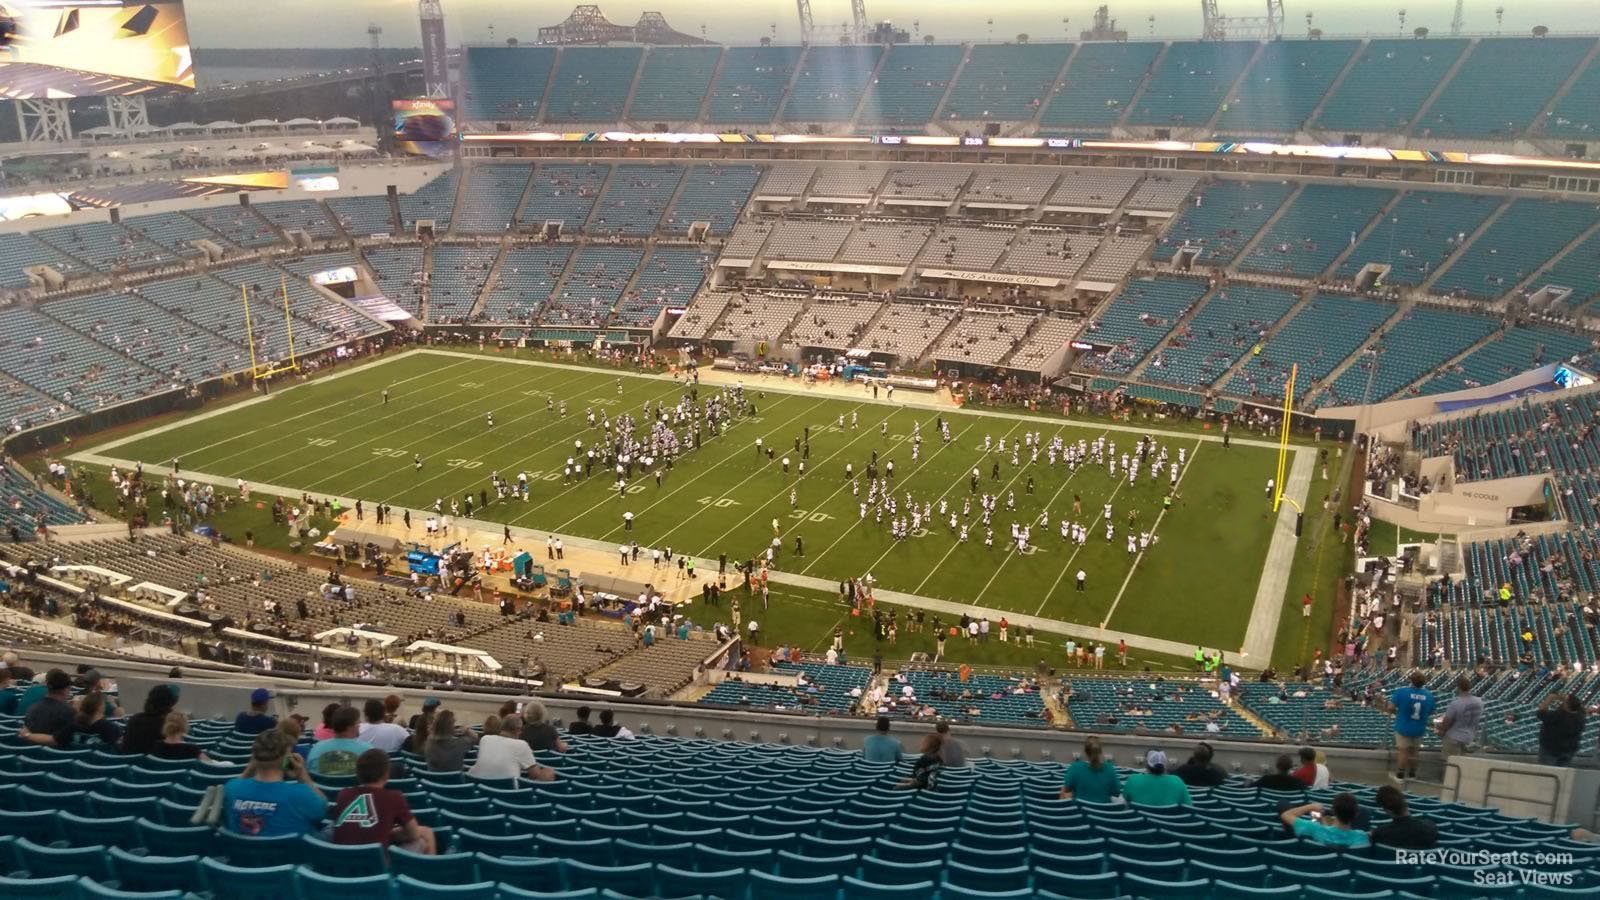 section 405, row bb seat view  - tiaa bank field